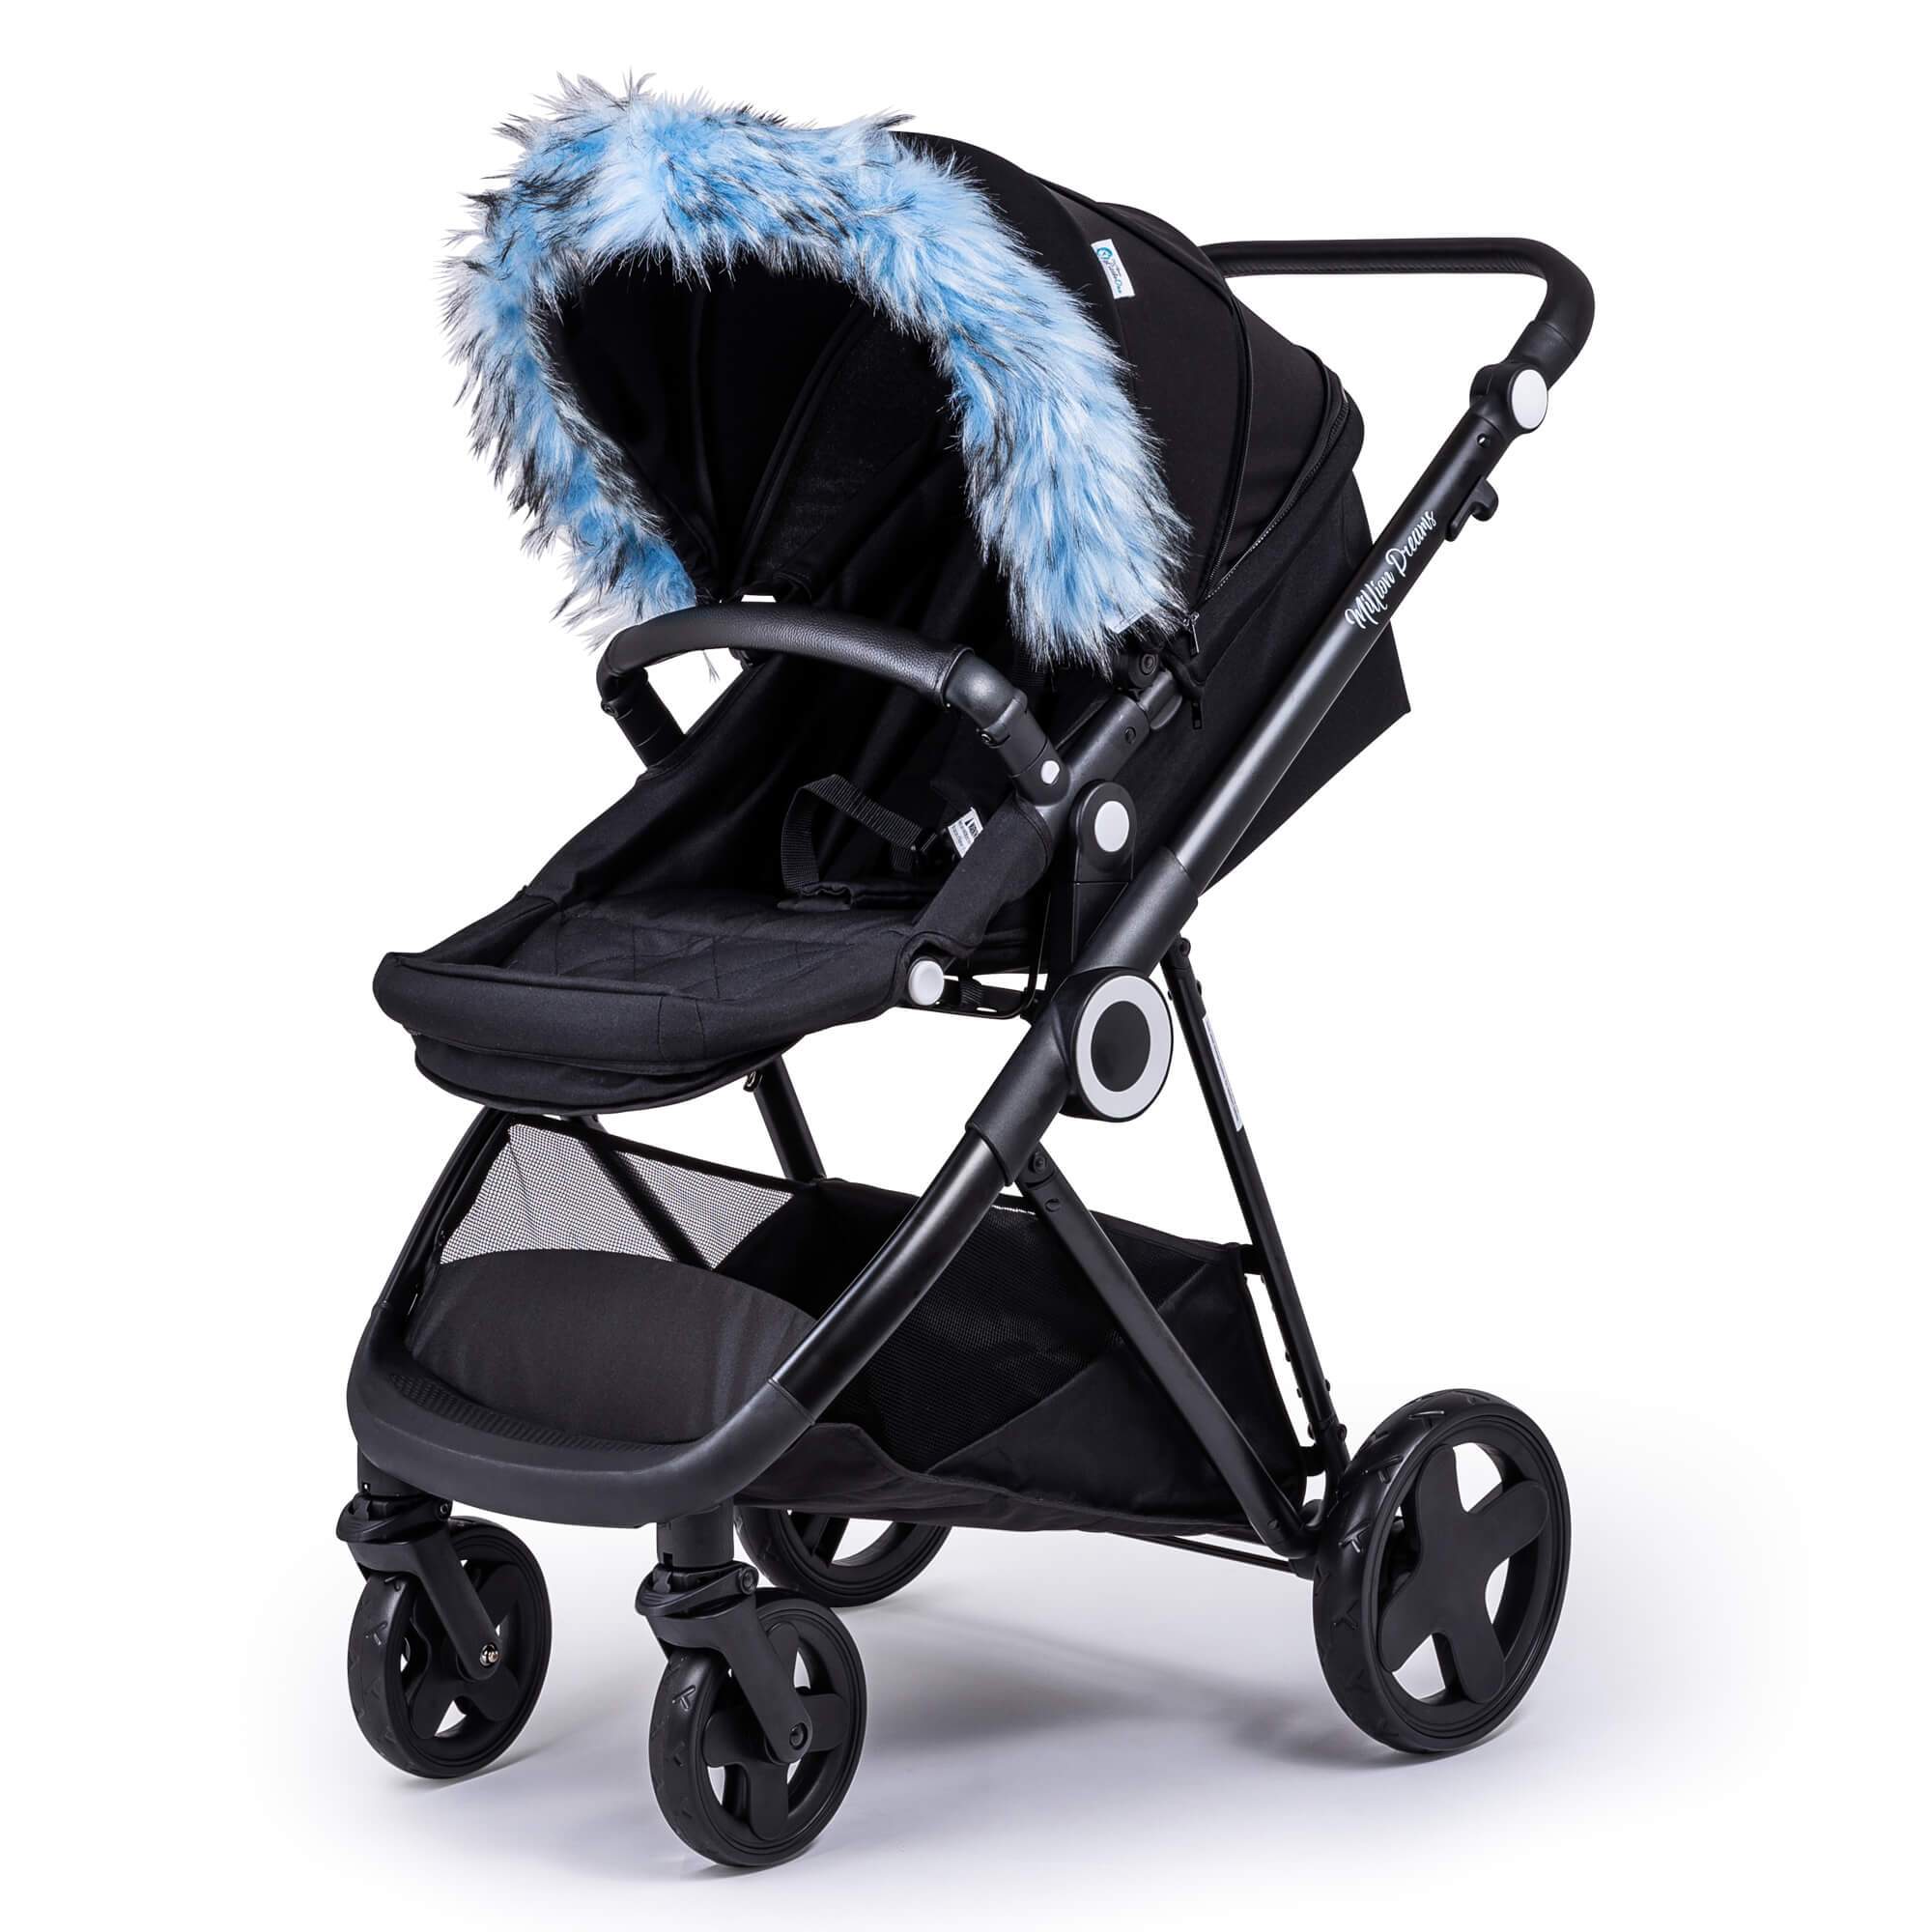 Pram Fur Hood Trim Attachment for Pushchair Compatible with Hartan - Light Blue / Fits All Models | For Your Little One